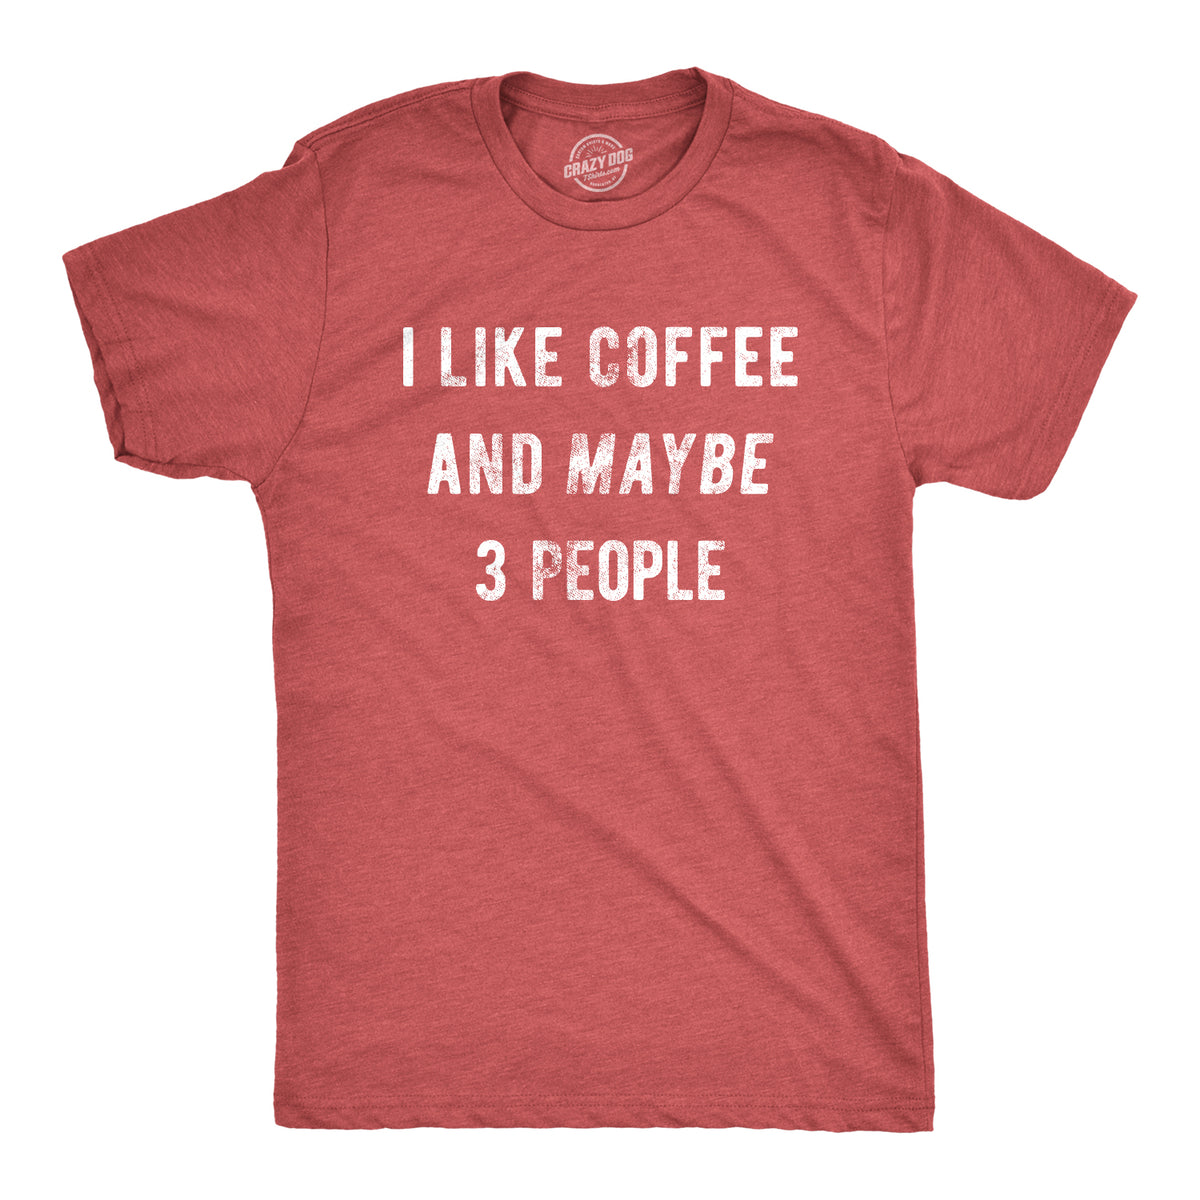 Funny Heather Red I Like Coffee And Maybe 3 People Mens T Shirt Nerdy Coffee Introvert Tee